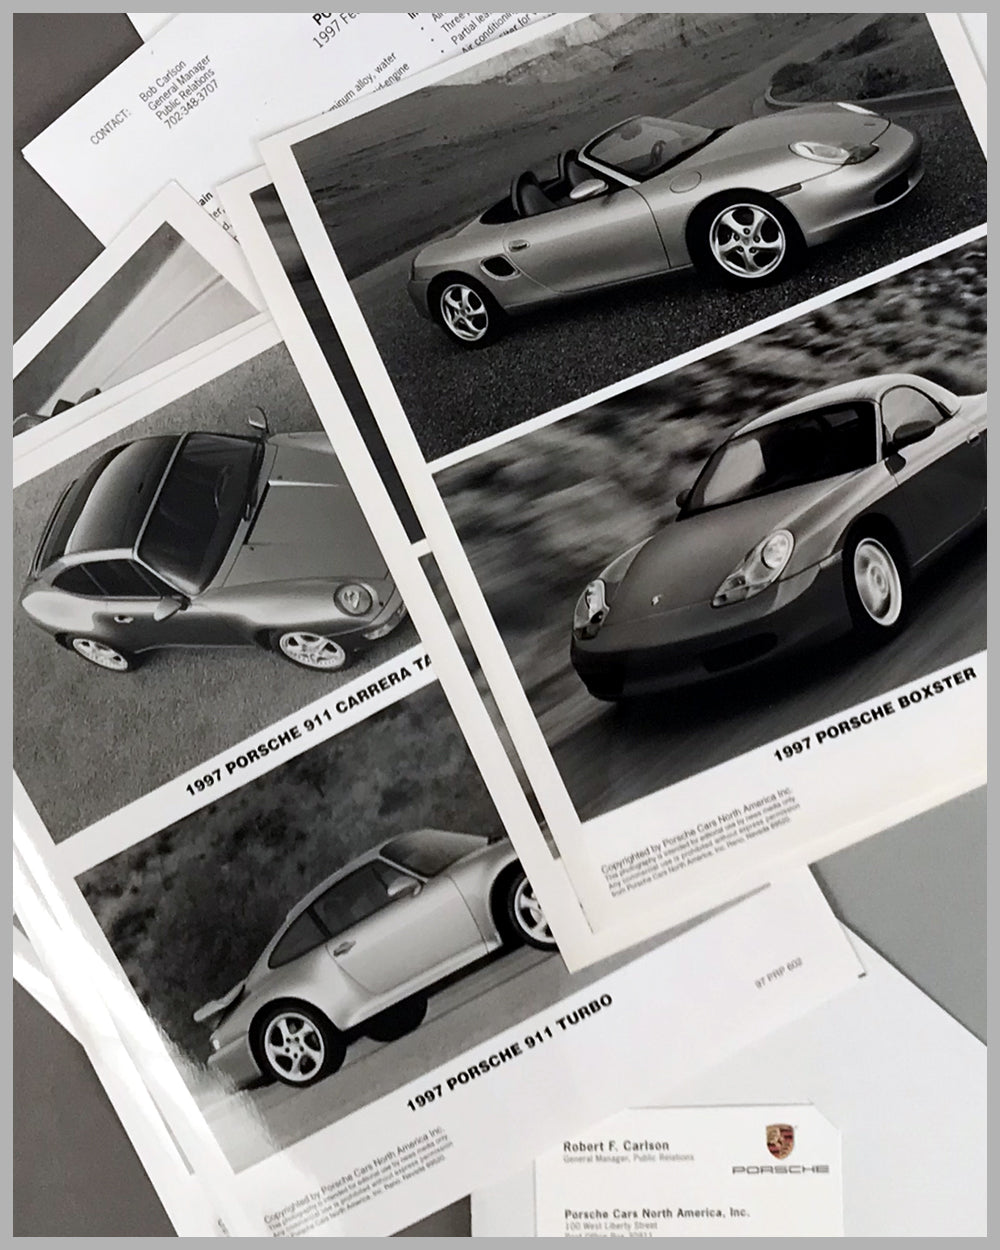 Porsche Boxster press release for the U.S. market on January 3rd 1997